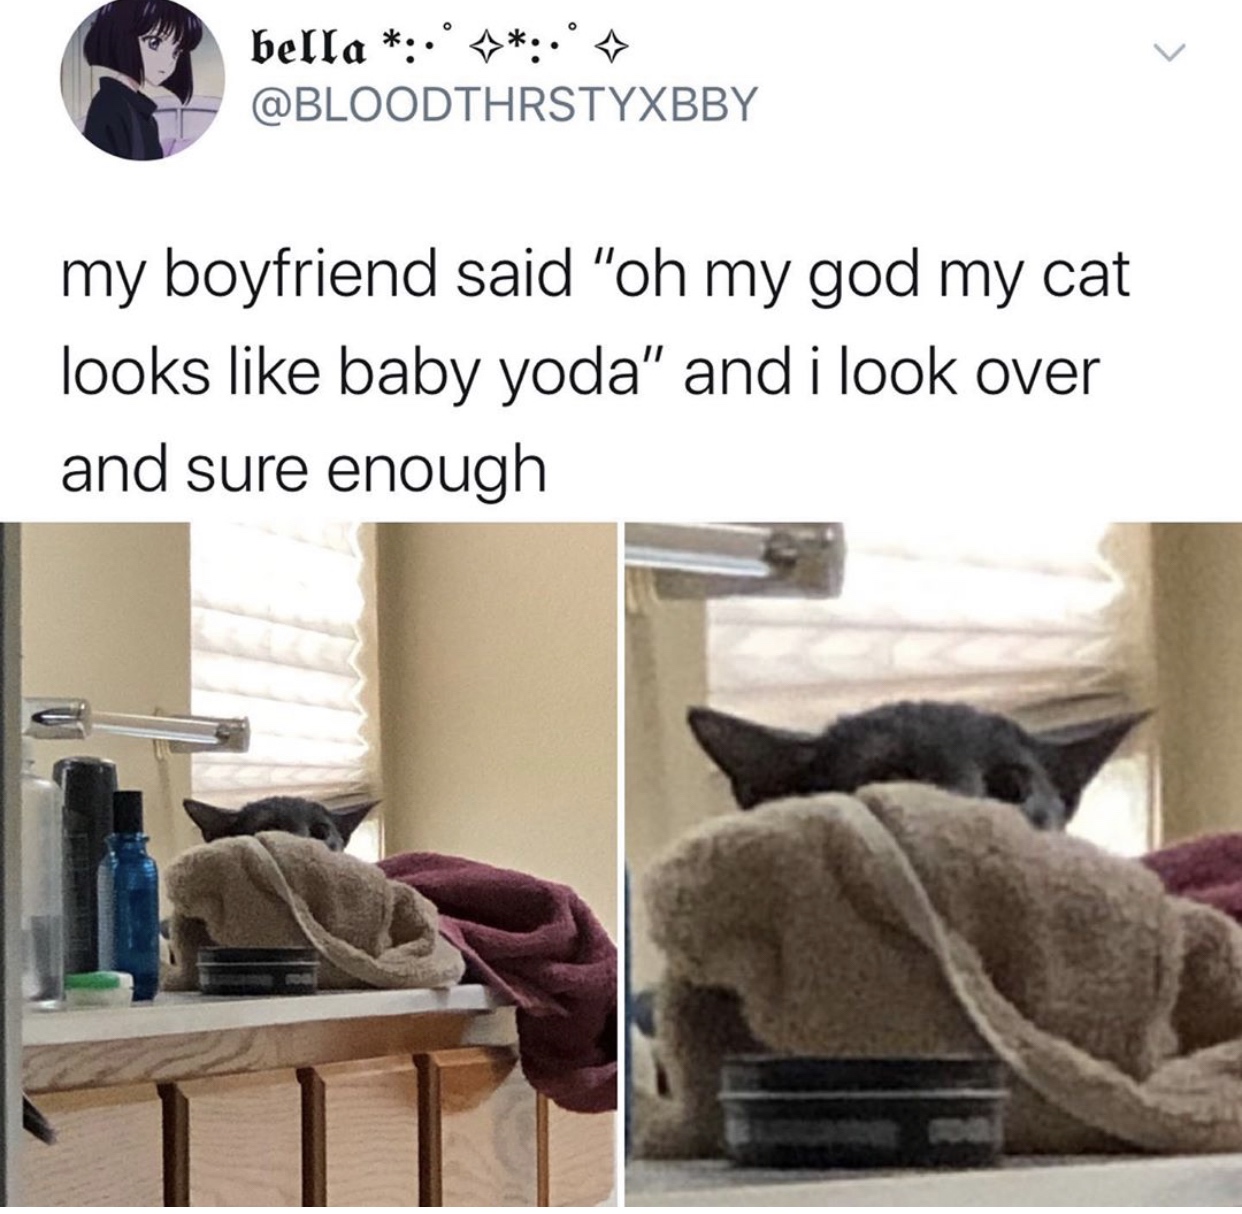 Yoda - bella . ^.' ^ my boyfriend said "oh my god my cat looks baby yoda" and i look over and sure enough